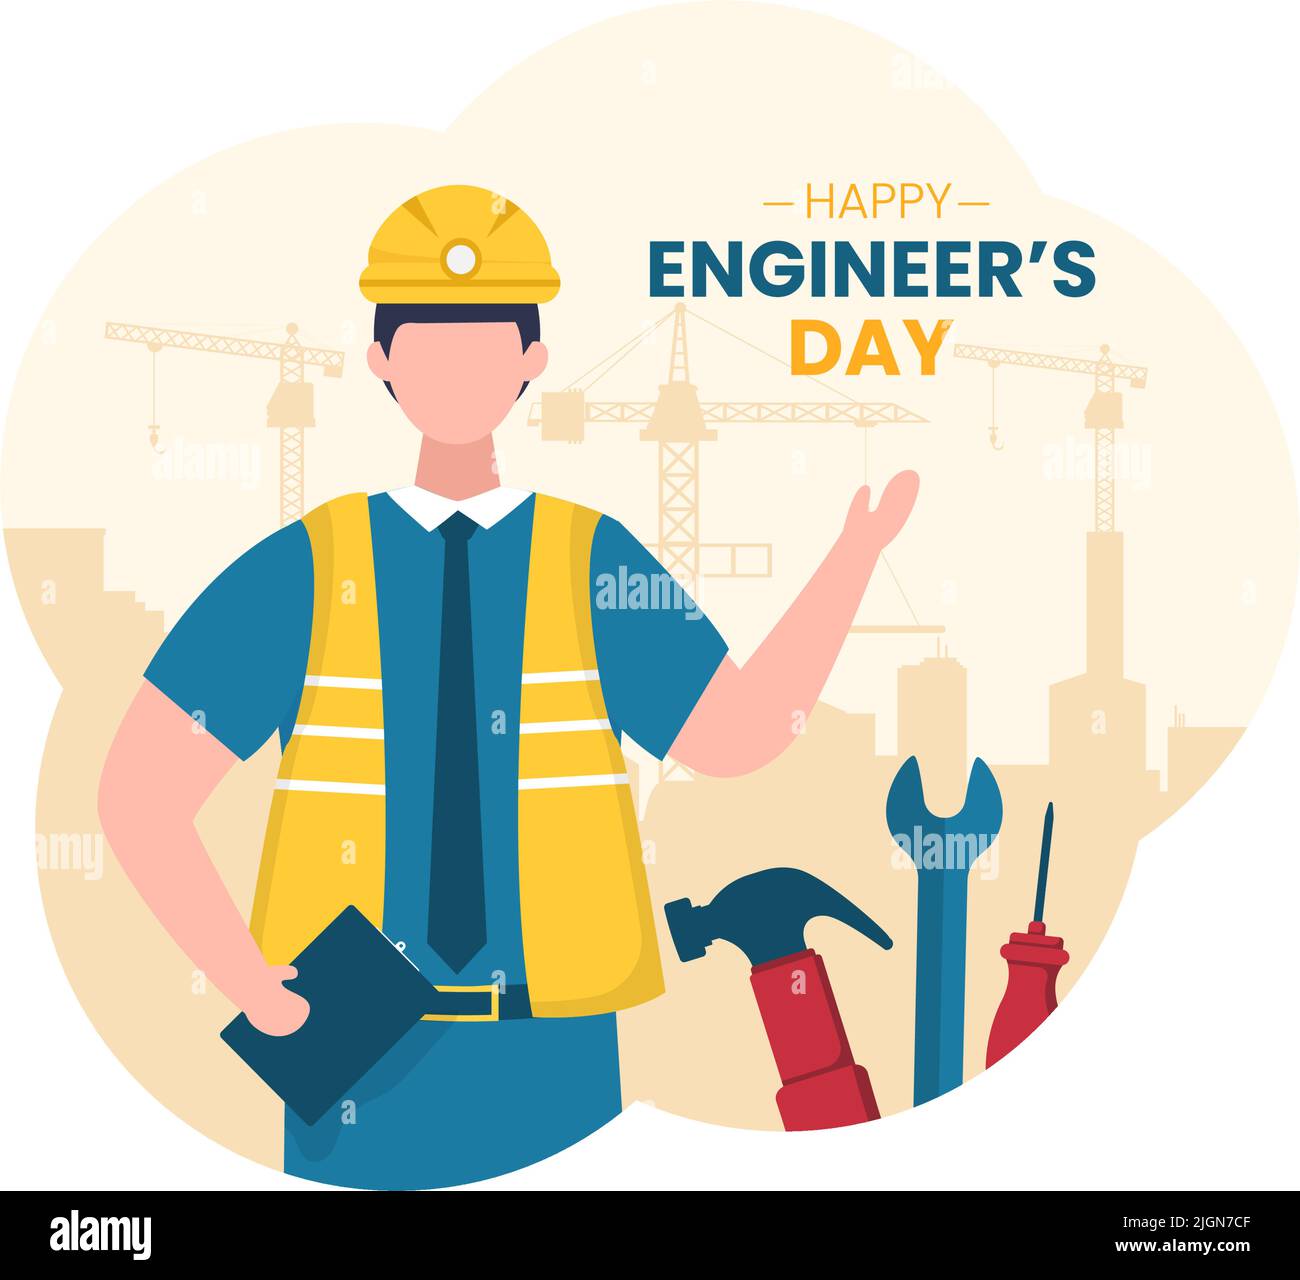 Happy Engineers Day Illustration Commemorative for Engineer with Worker, Helmet and Tools of in Flat Style Cartoon Stock Vector